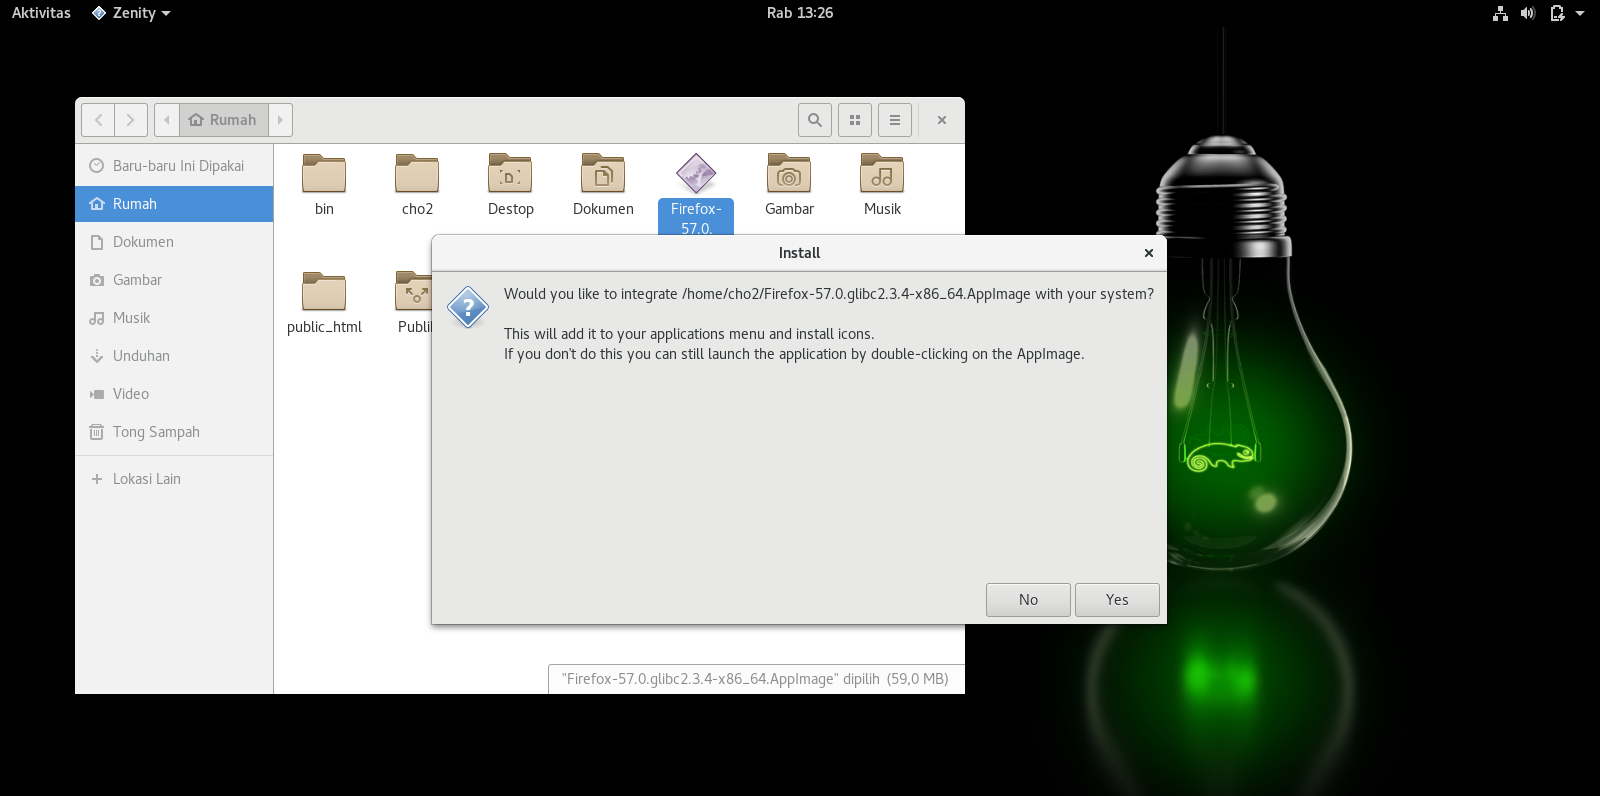 https://opensuse.id/wp-content/uploads/2017/11/VirtualBox_Leap-42.3_15_11_2017_13_24_38.png